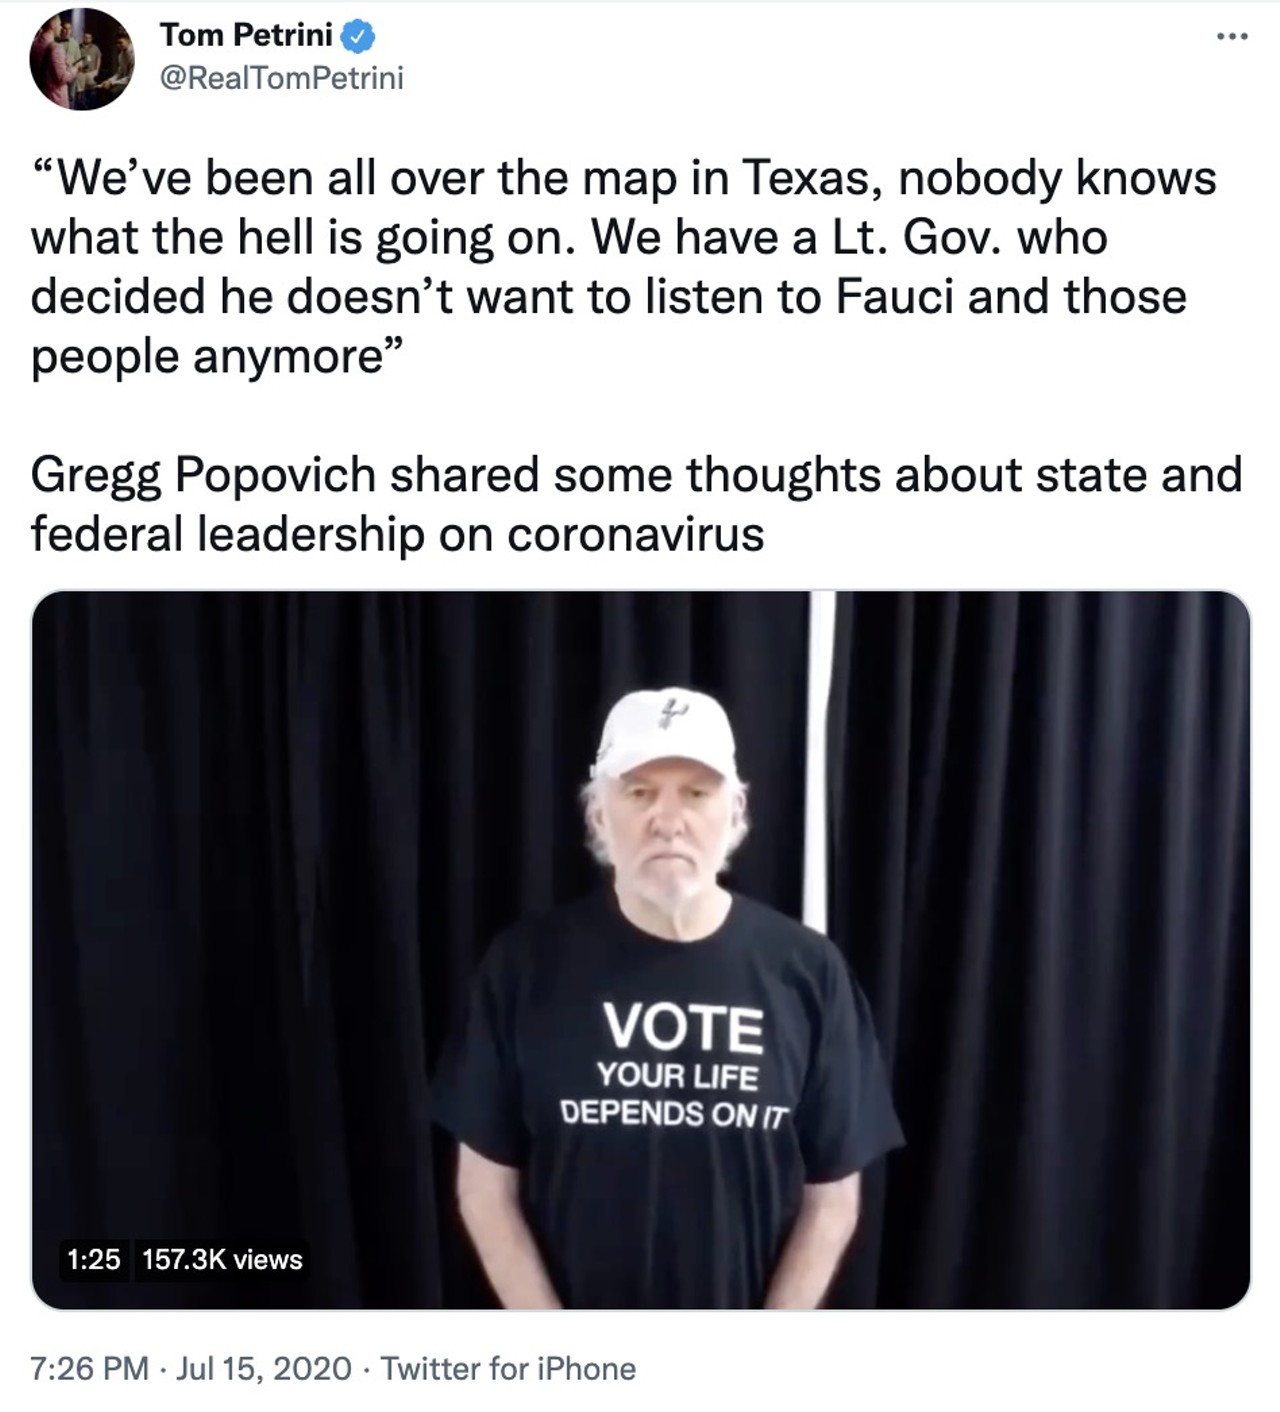 "No Fucks Given" Pop
Depending on which side of the political divide, you either love or hate the "No Fucks Given" version of Spurs Coach Greg Popovich who emerged during the NBA bubble. Remember when he skewered Texas' GOP leaders as "cowards?" Grab a black “Vote: your life depends on it” T-shirt and a white Spurs hat to complete the look. 
Photo via Twitter / RealTomPetrini